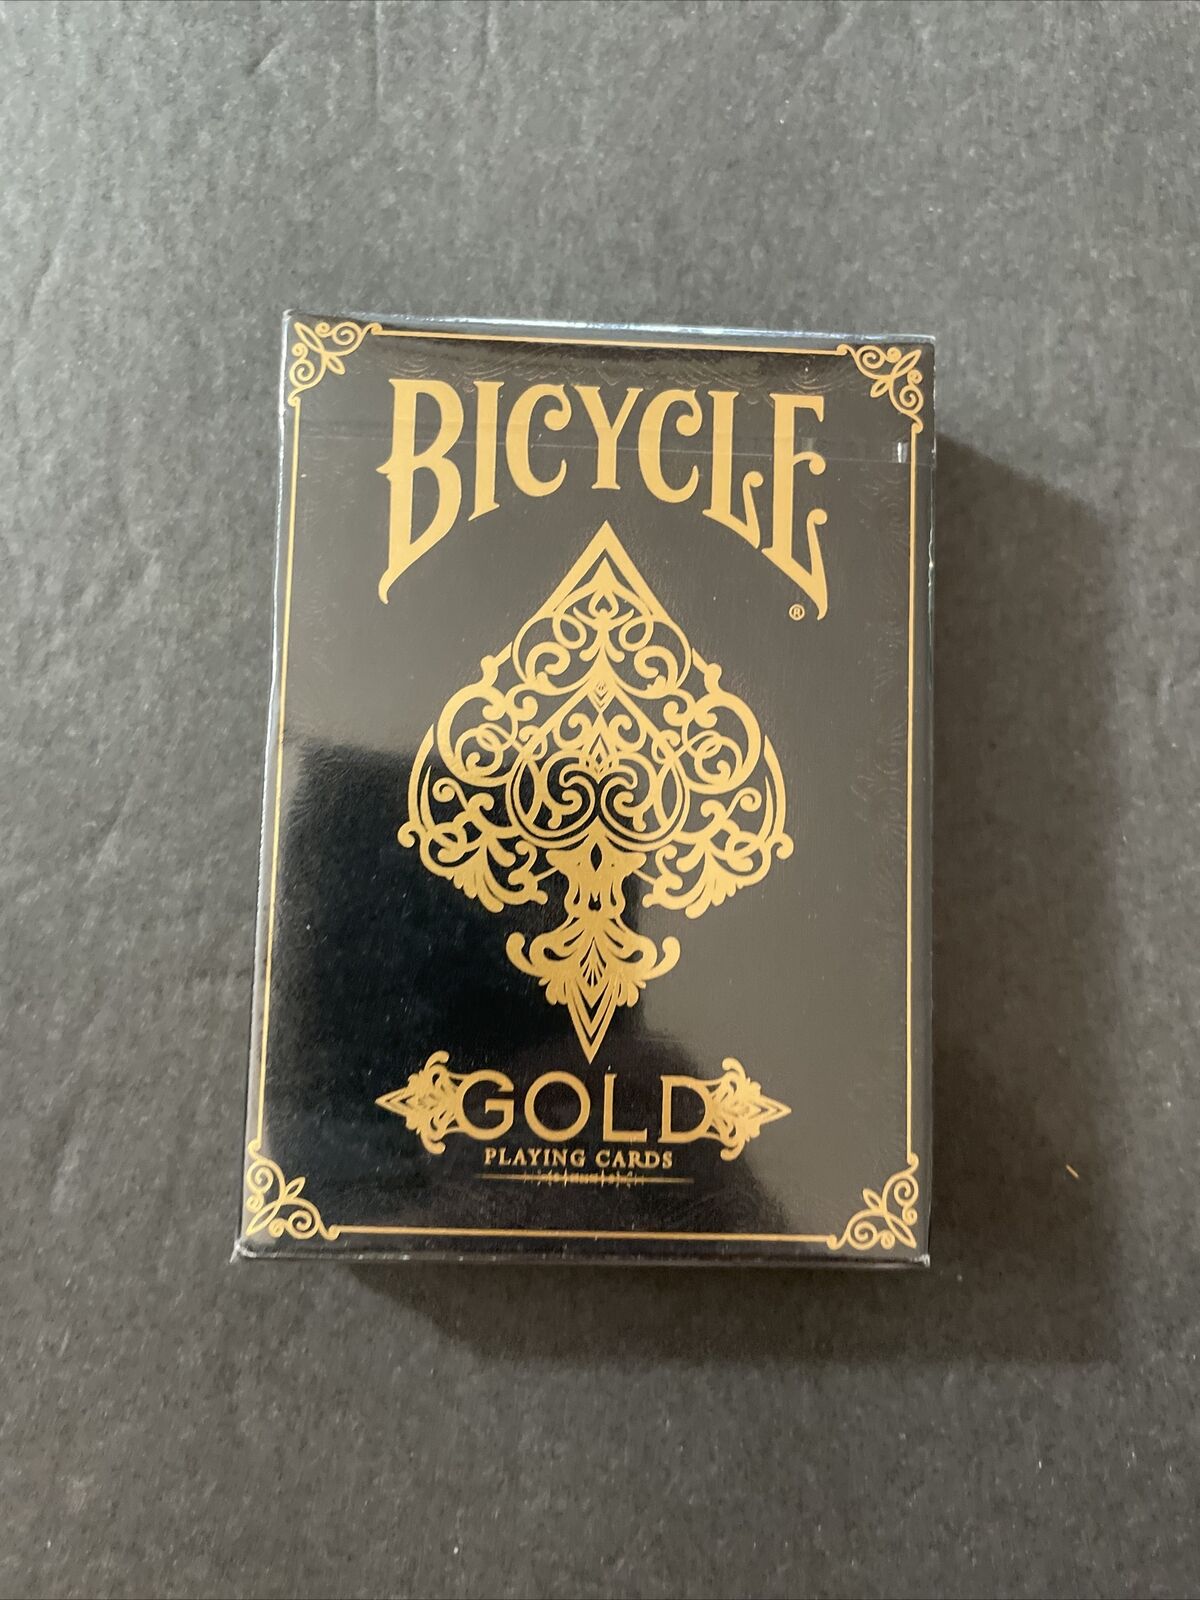 Bicycle Gold Deck by US Playing Cards New Sealed 2014 US Playing Card Company